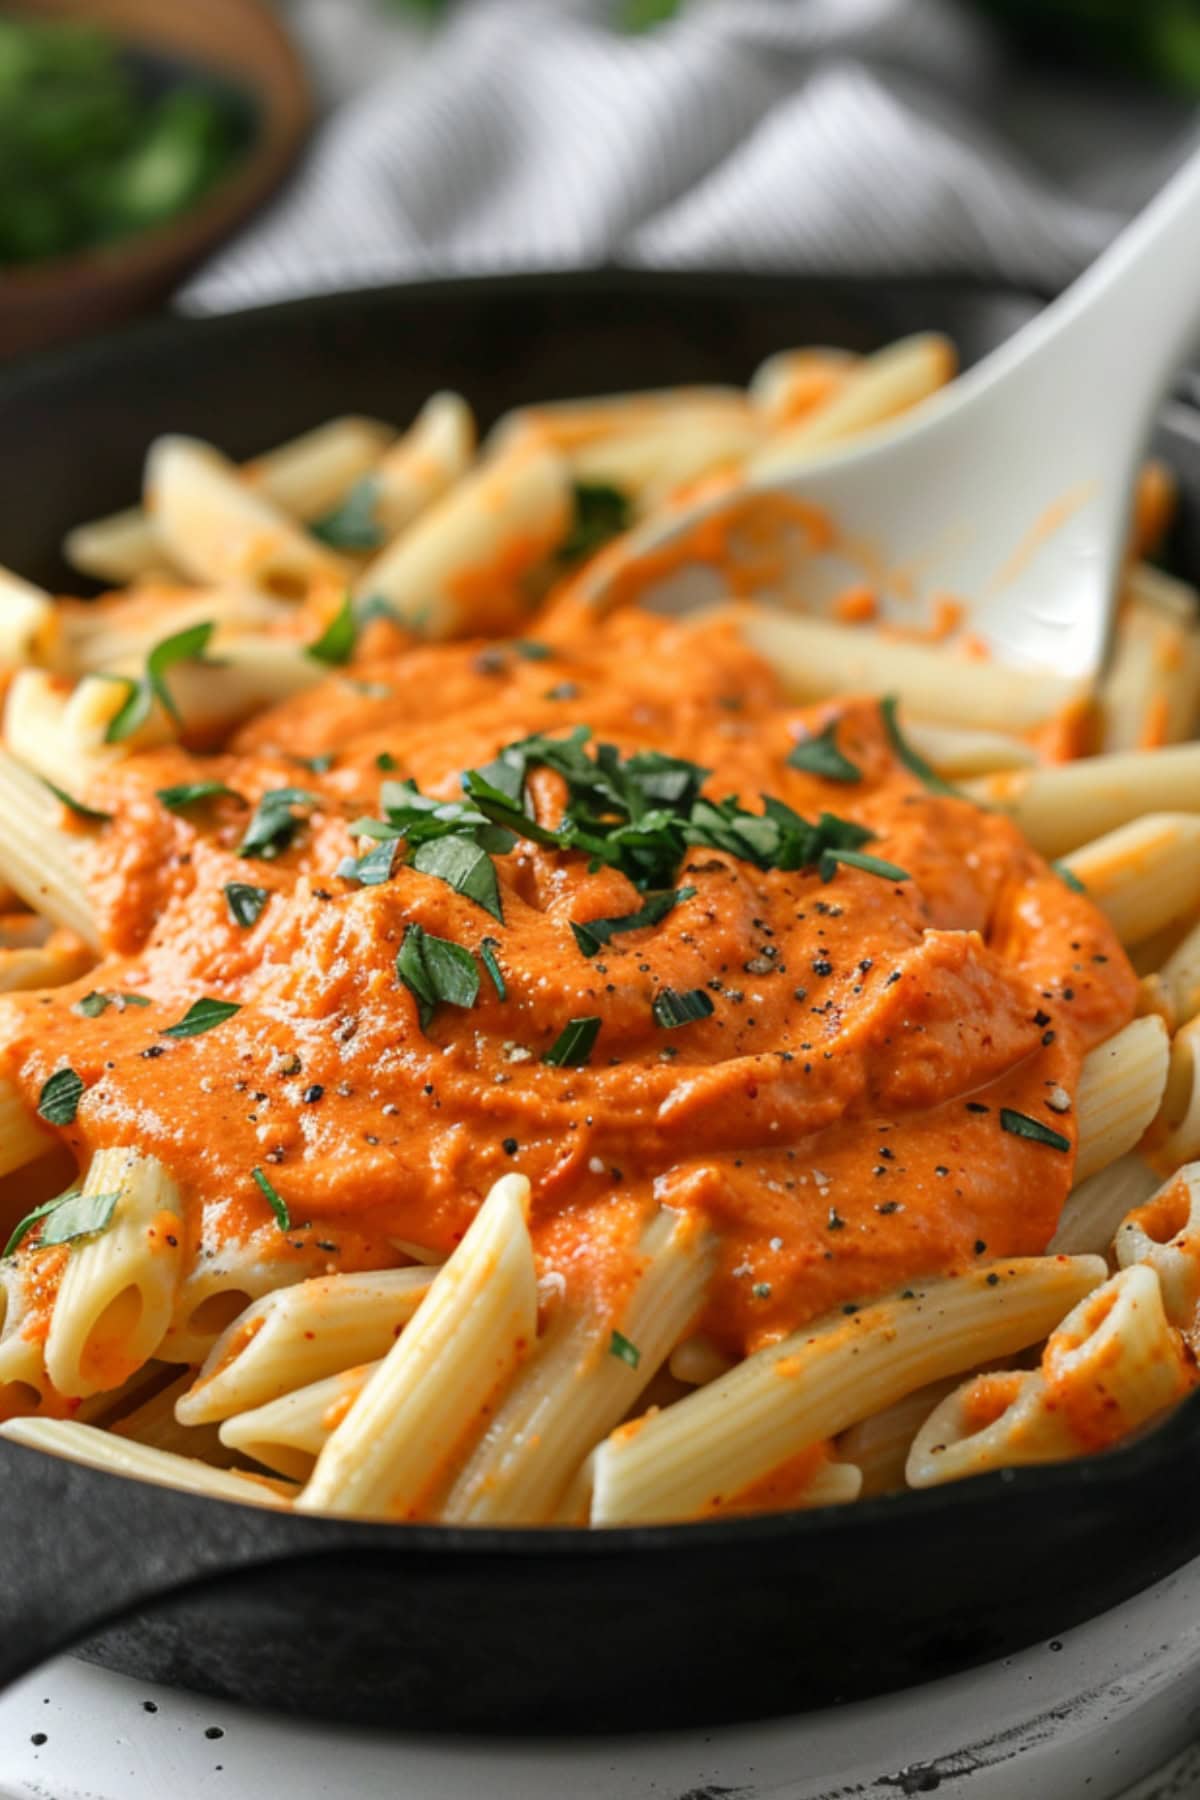 Penne pasta tossed in skillet pan with roasted red peppers puree.